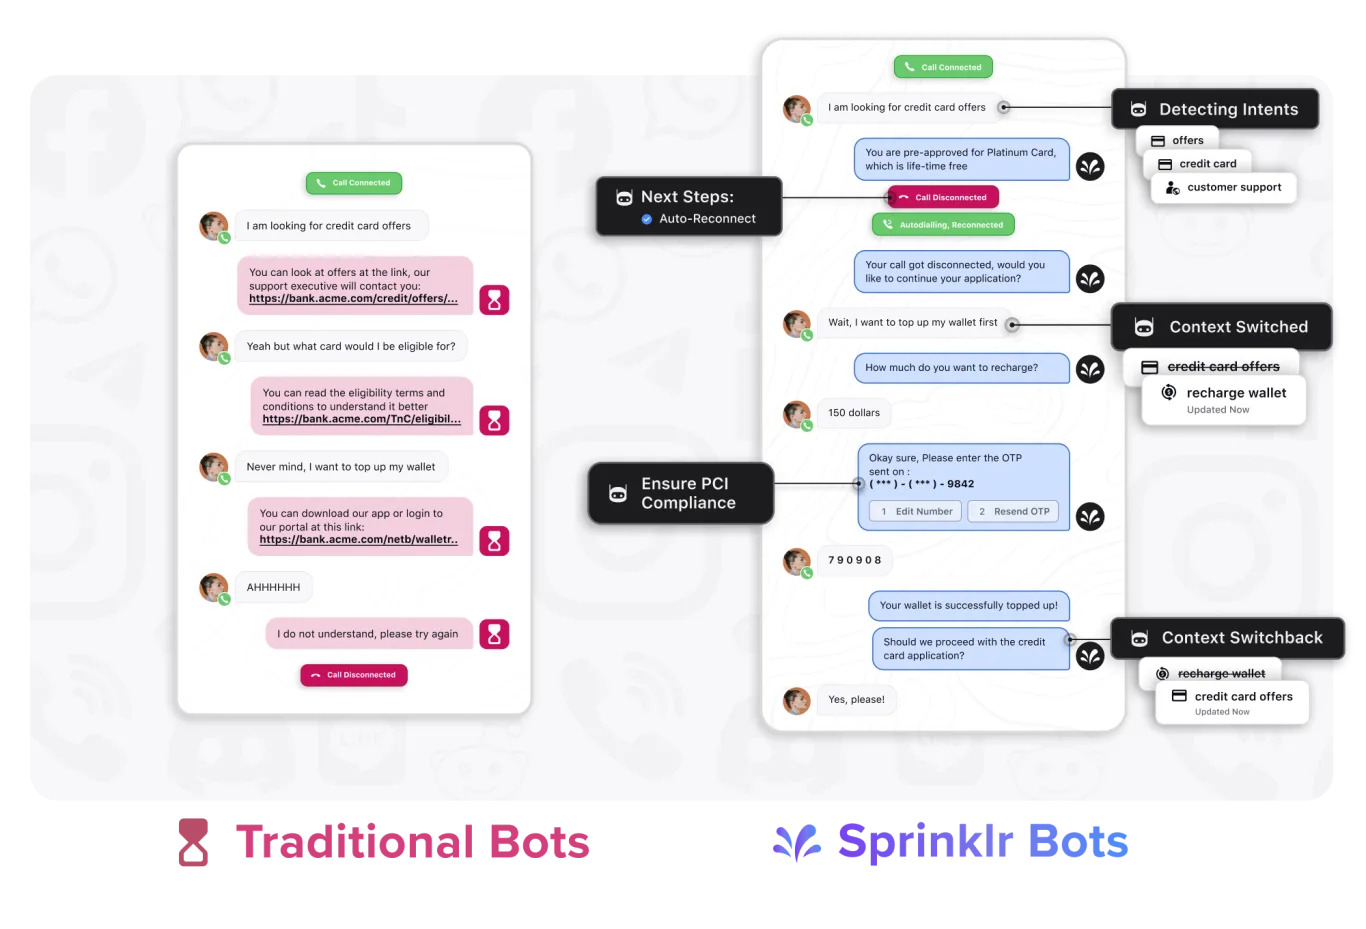 How Sprinklr-s advanced conversational AI bots compare to traditional bots